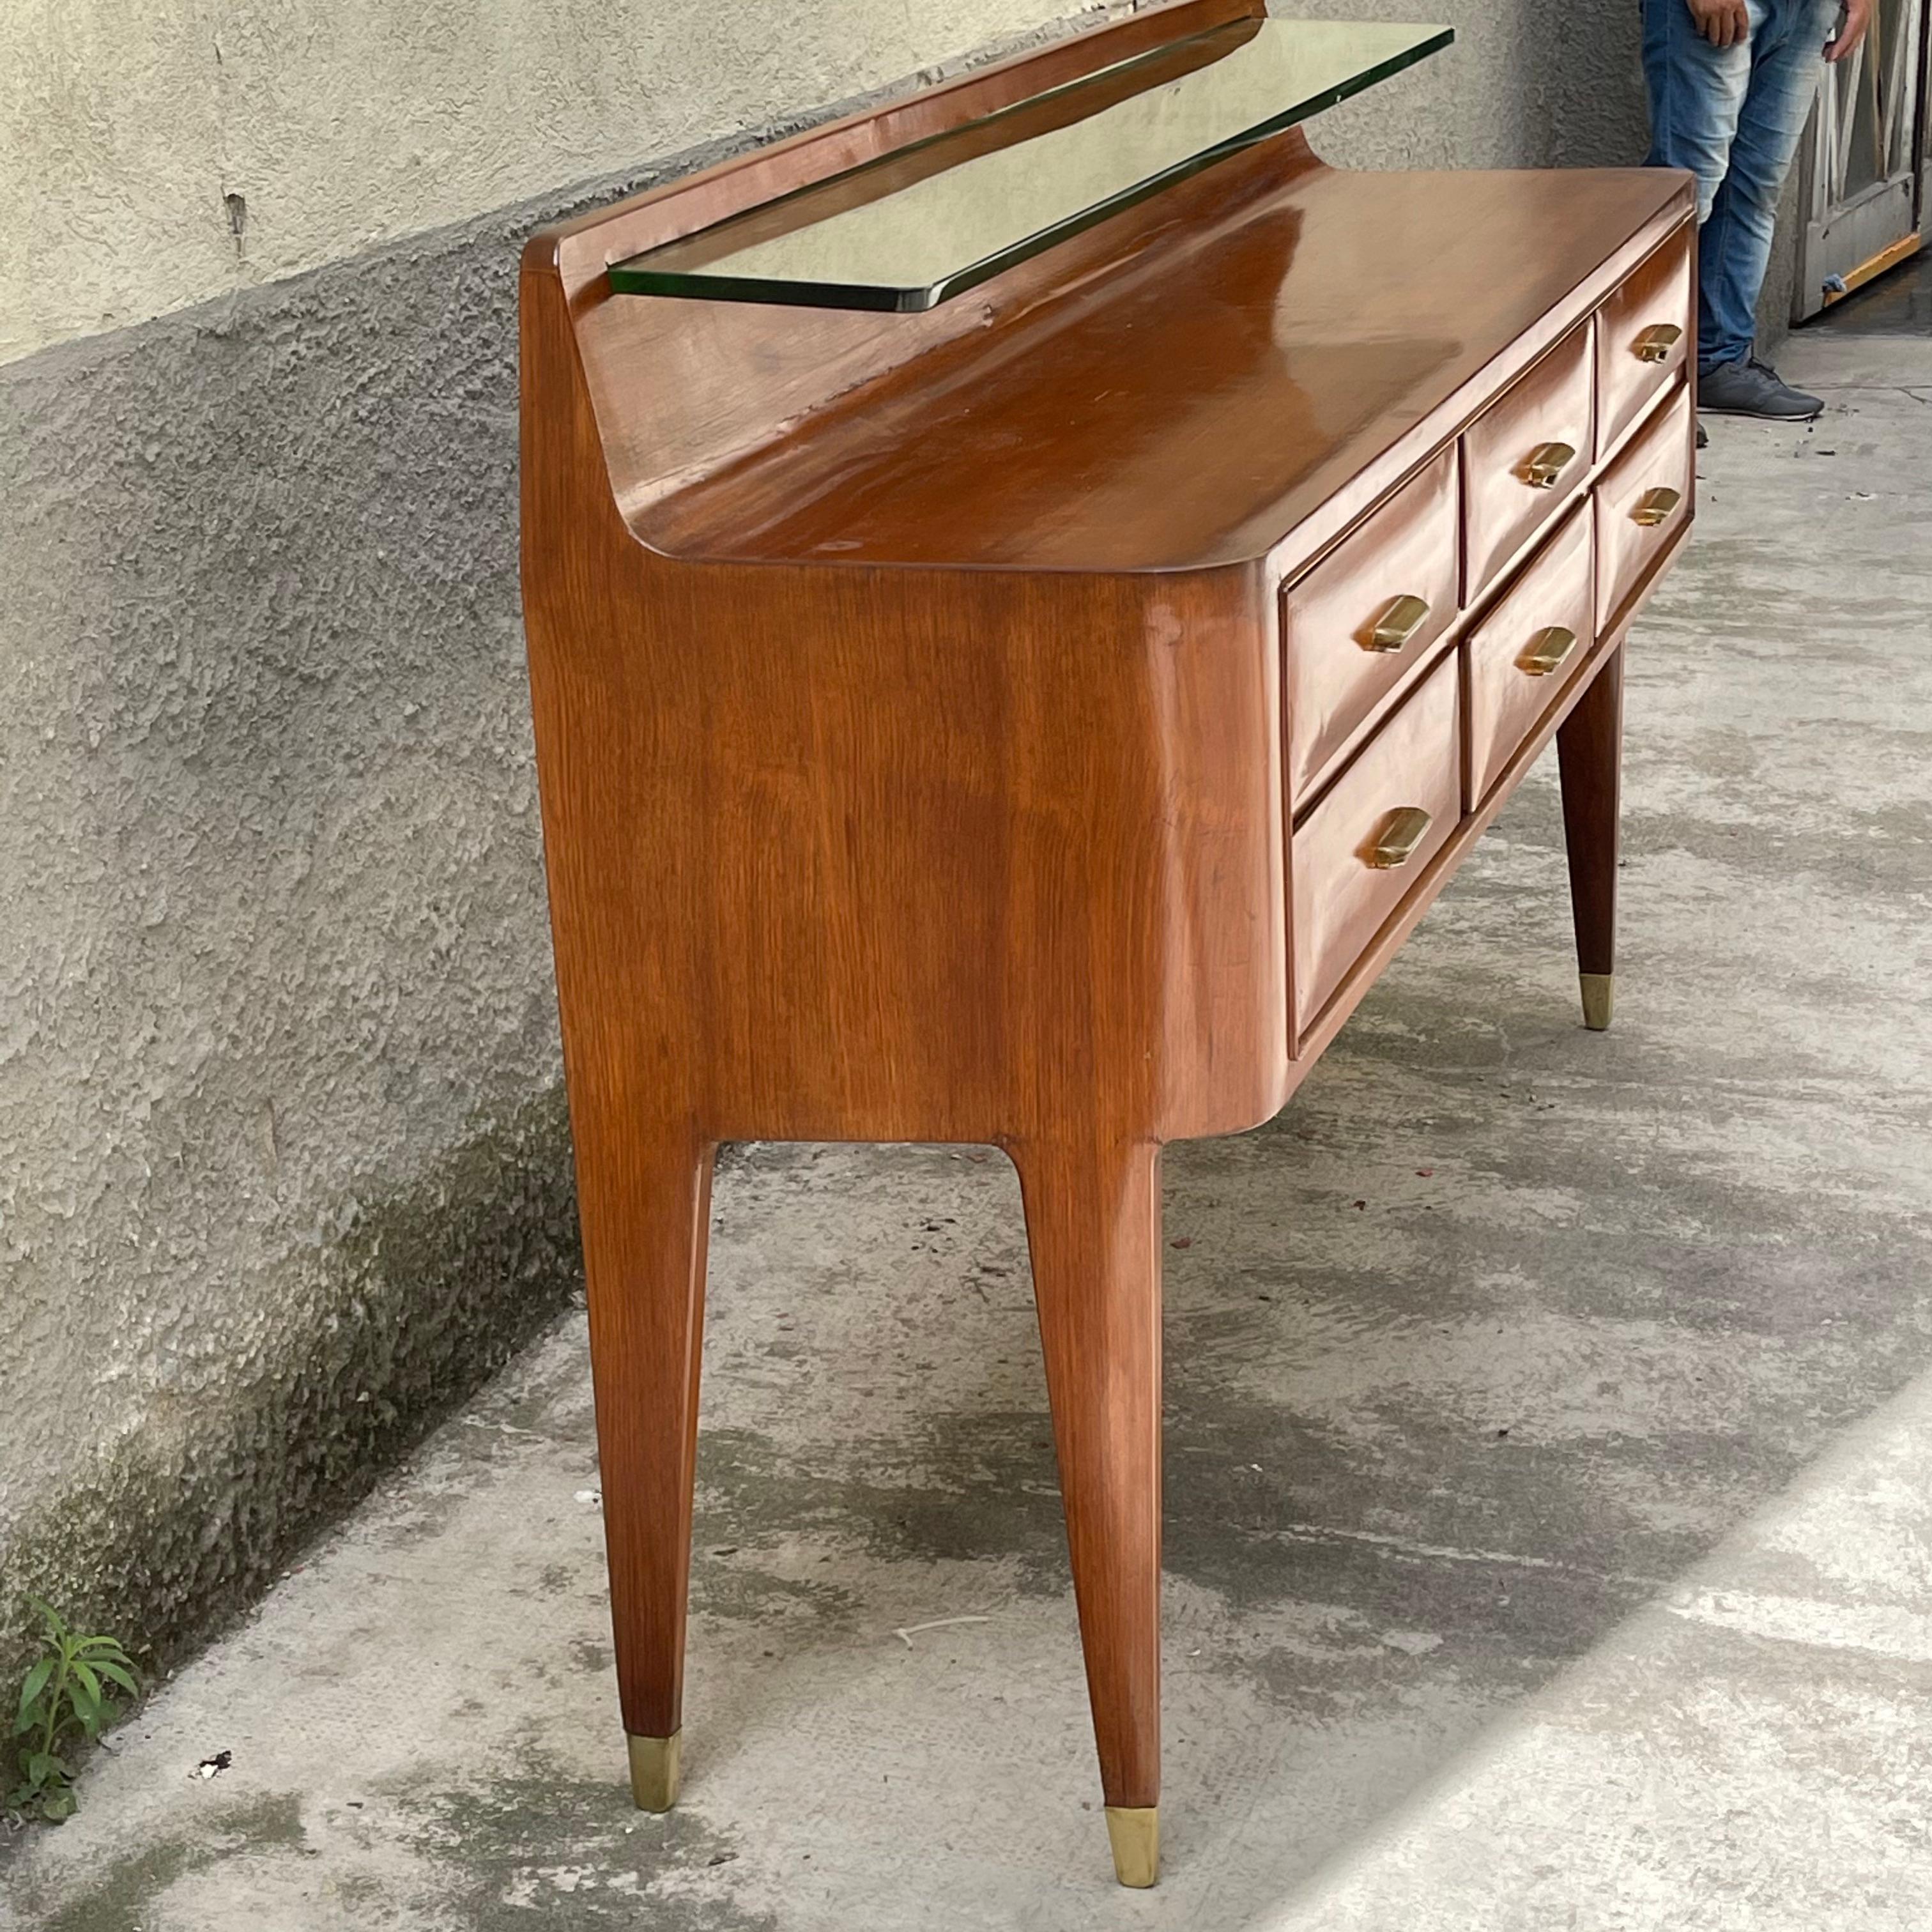 Mid-Century Modern Sideboard in the Style of Ico Parisi - Brass and Glass Details - Italy 1950s For Sale